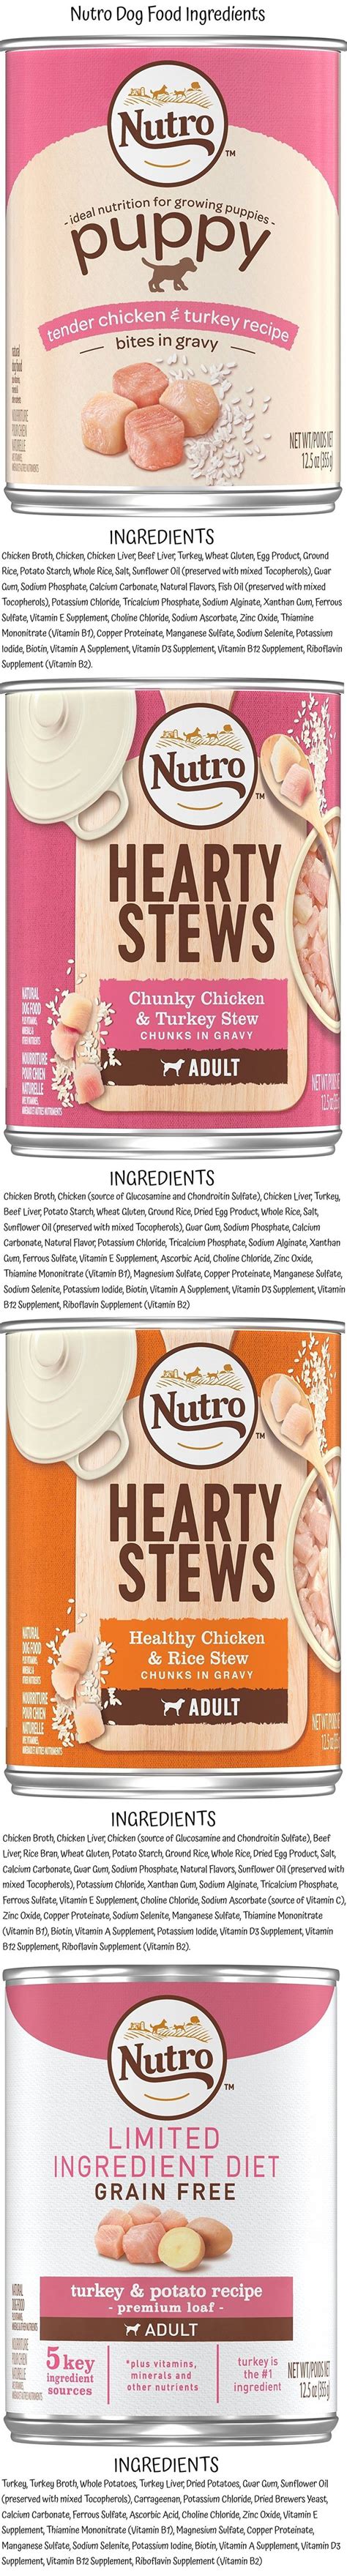 This ultra formula for senior dogs has the perfect balance of protein, fat, and carbs for senior dogs. Nutro Dog Food Ingredients More info about http://amzn.to ...